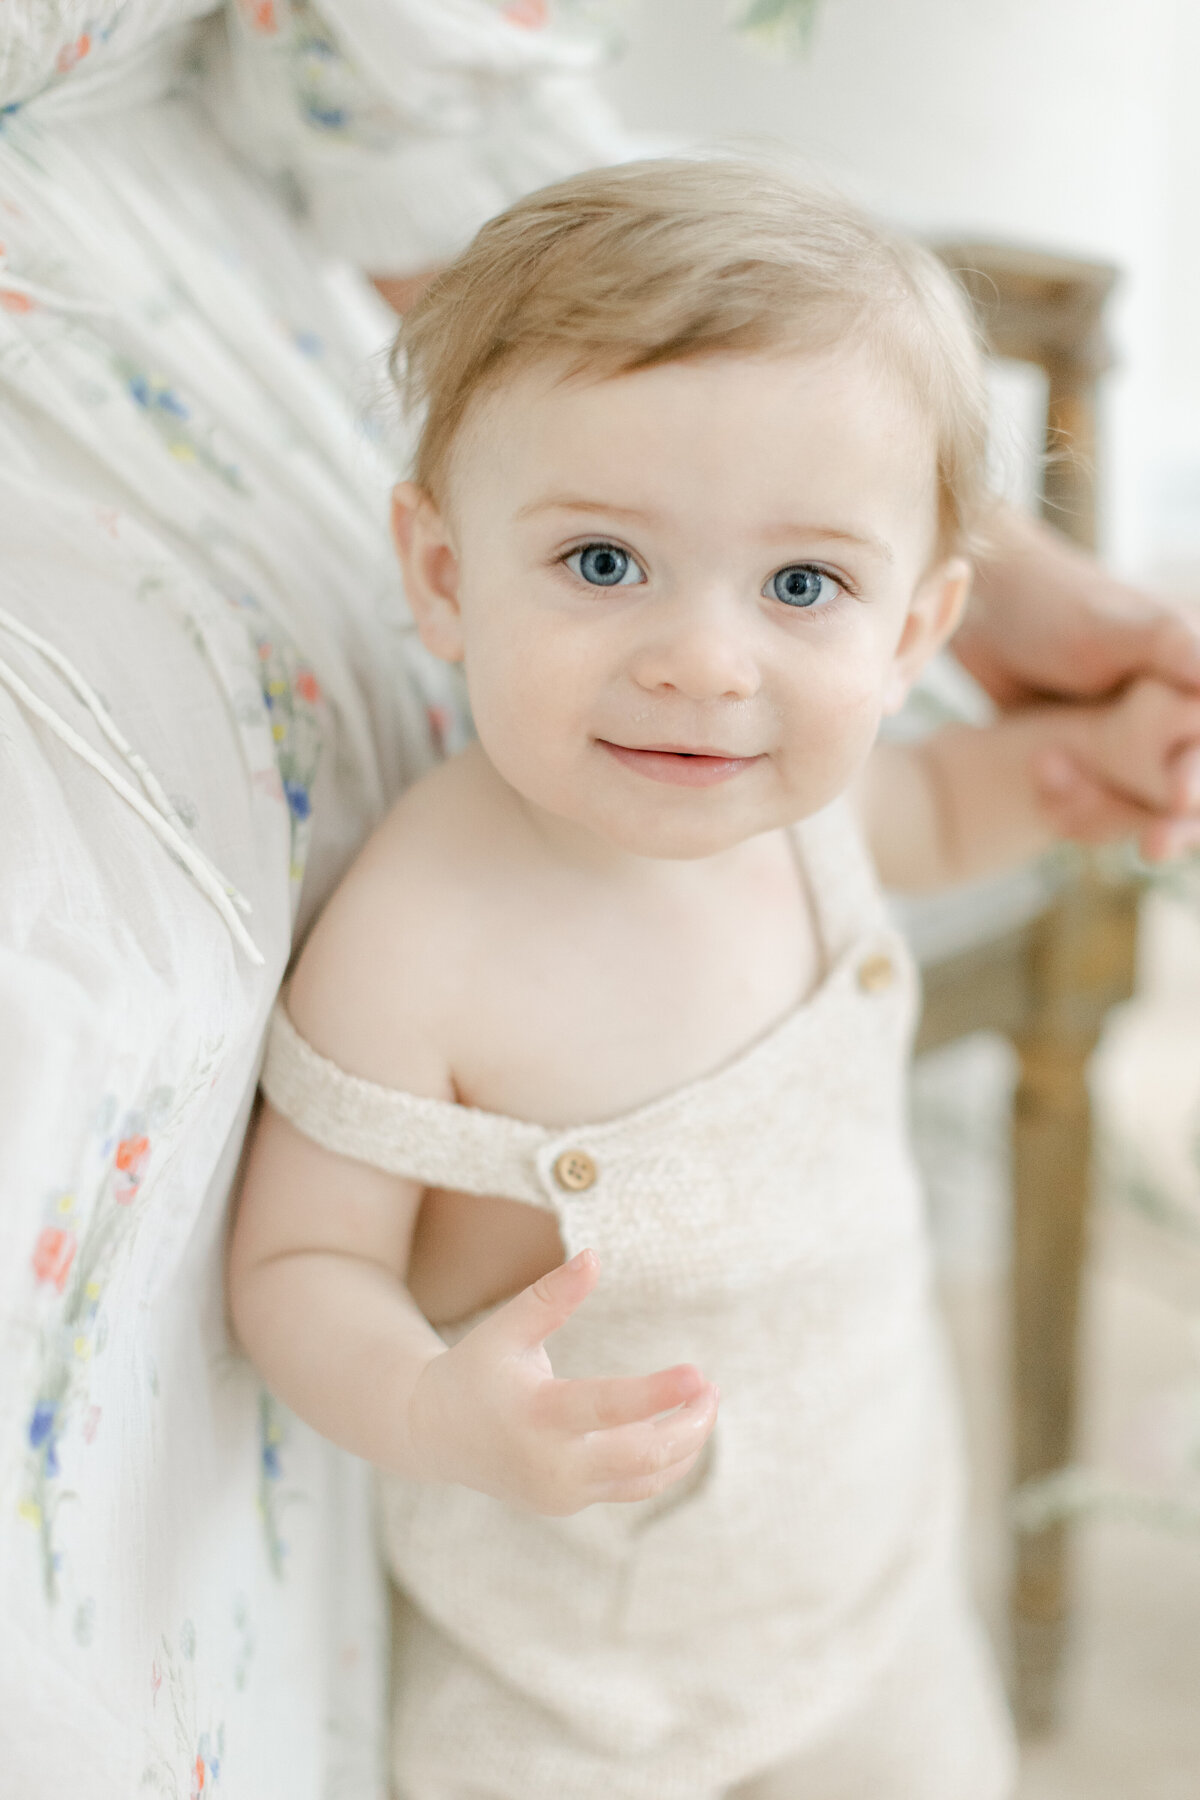 sweet 9 month old boy with bright blue eyes wearing a knit overall set from Philadelphia Portrait Photographer Tara Federico's studio wardrobe